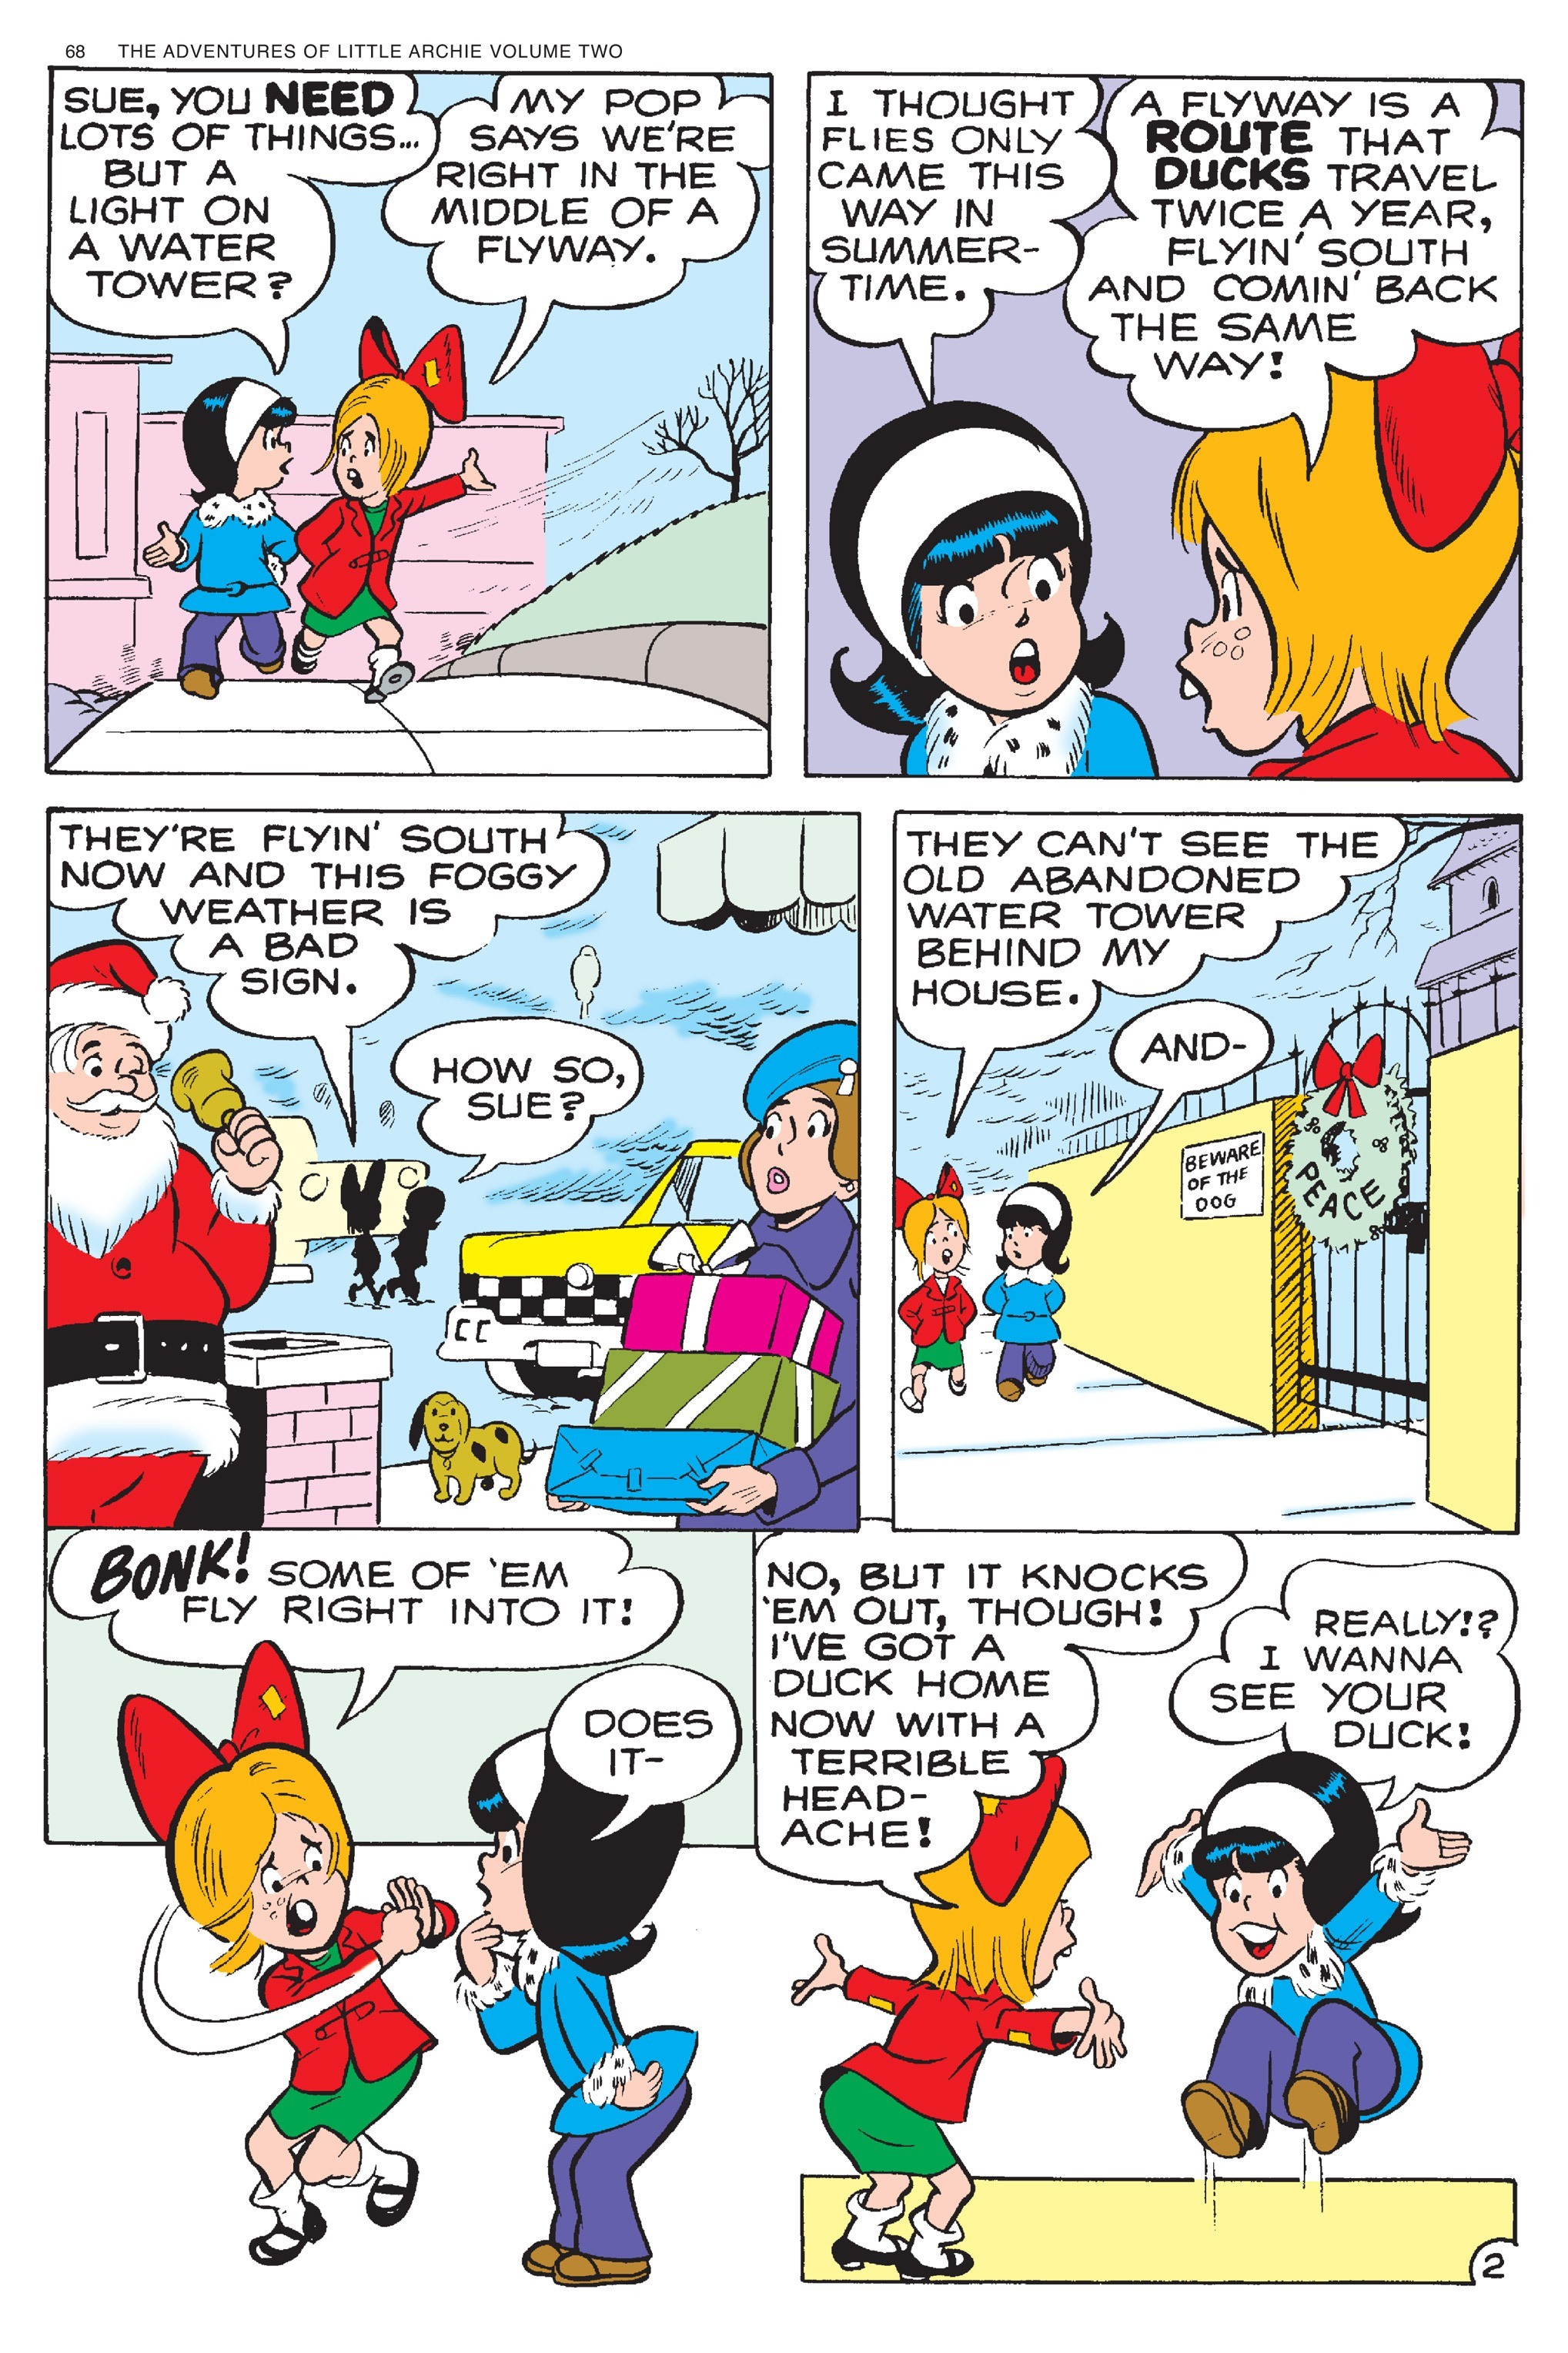 Read online Adventures of Little Archie comic -  Issue # TPB 2 - 69